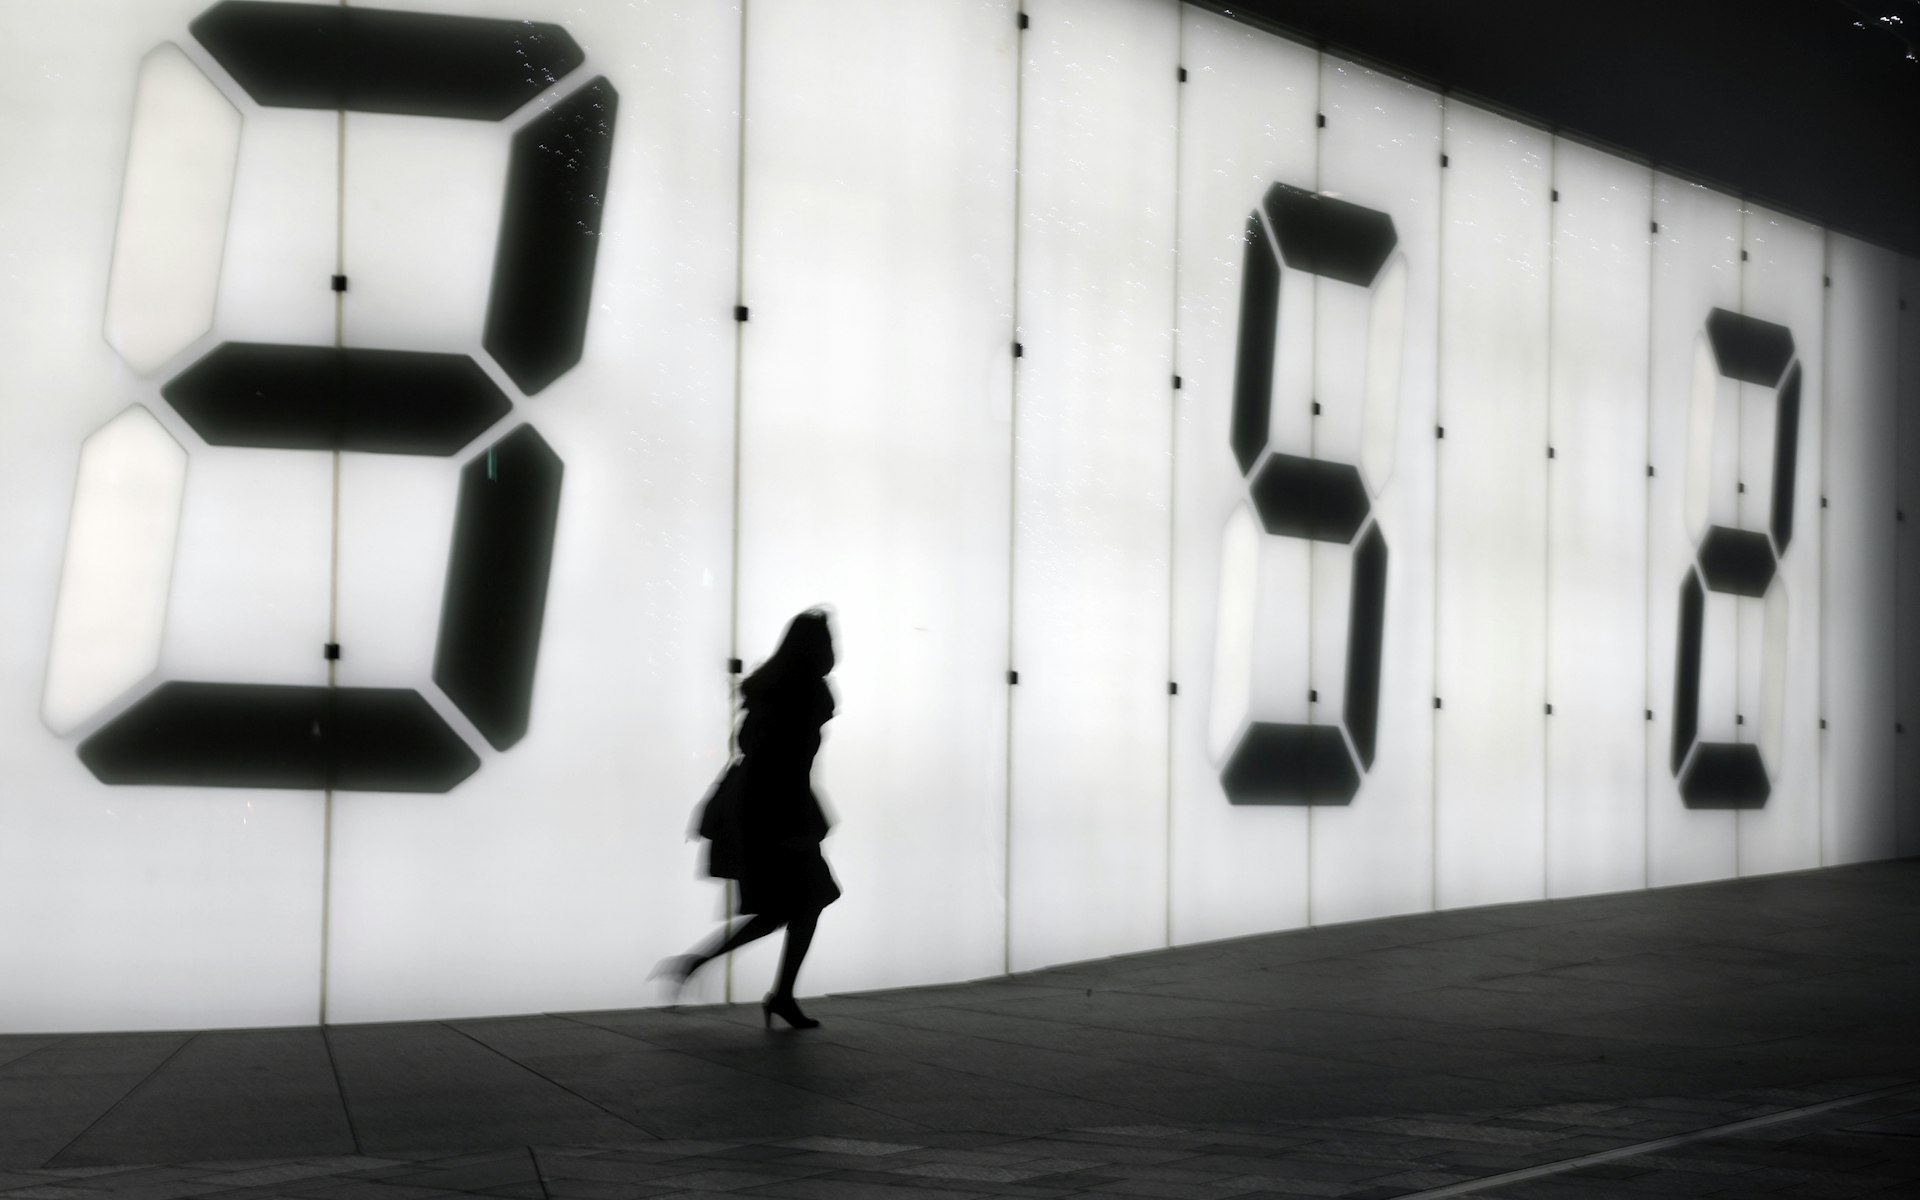 One female pedestrian walking alongside a digital clock display wall on the street at night in Roppongi, Tokyo, an area famous for its nightlife